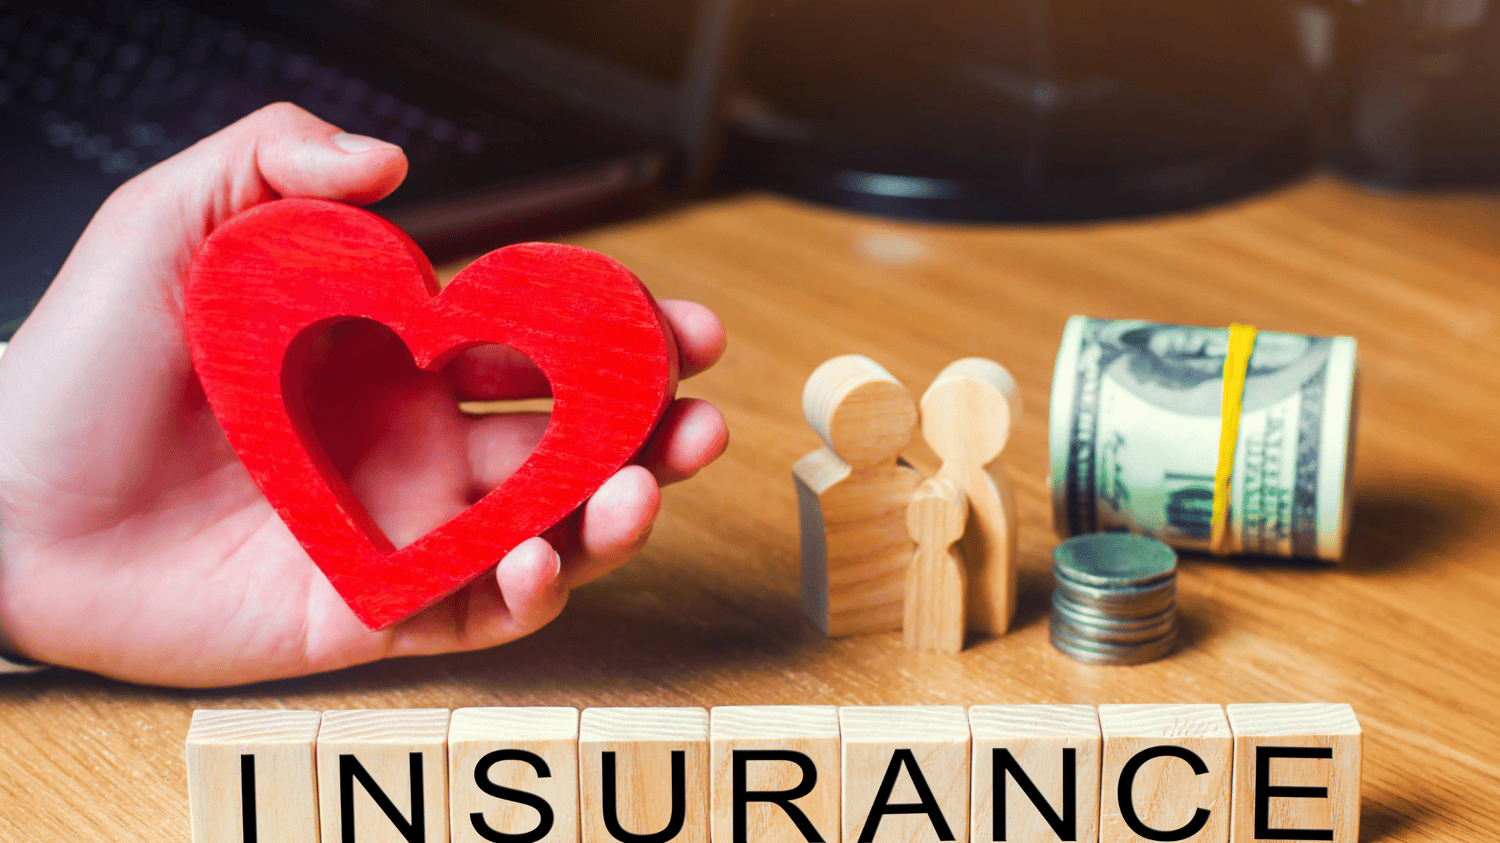 HOW ARE LIFE INSURANCE RATES DETERMINED?